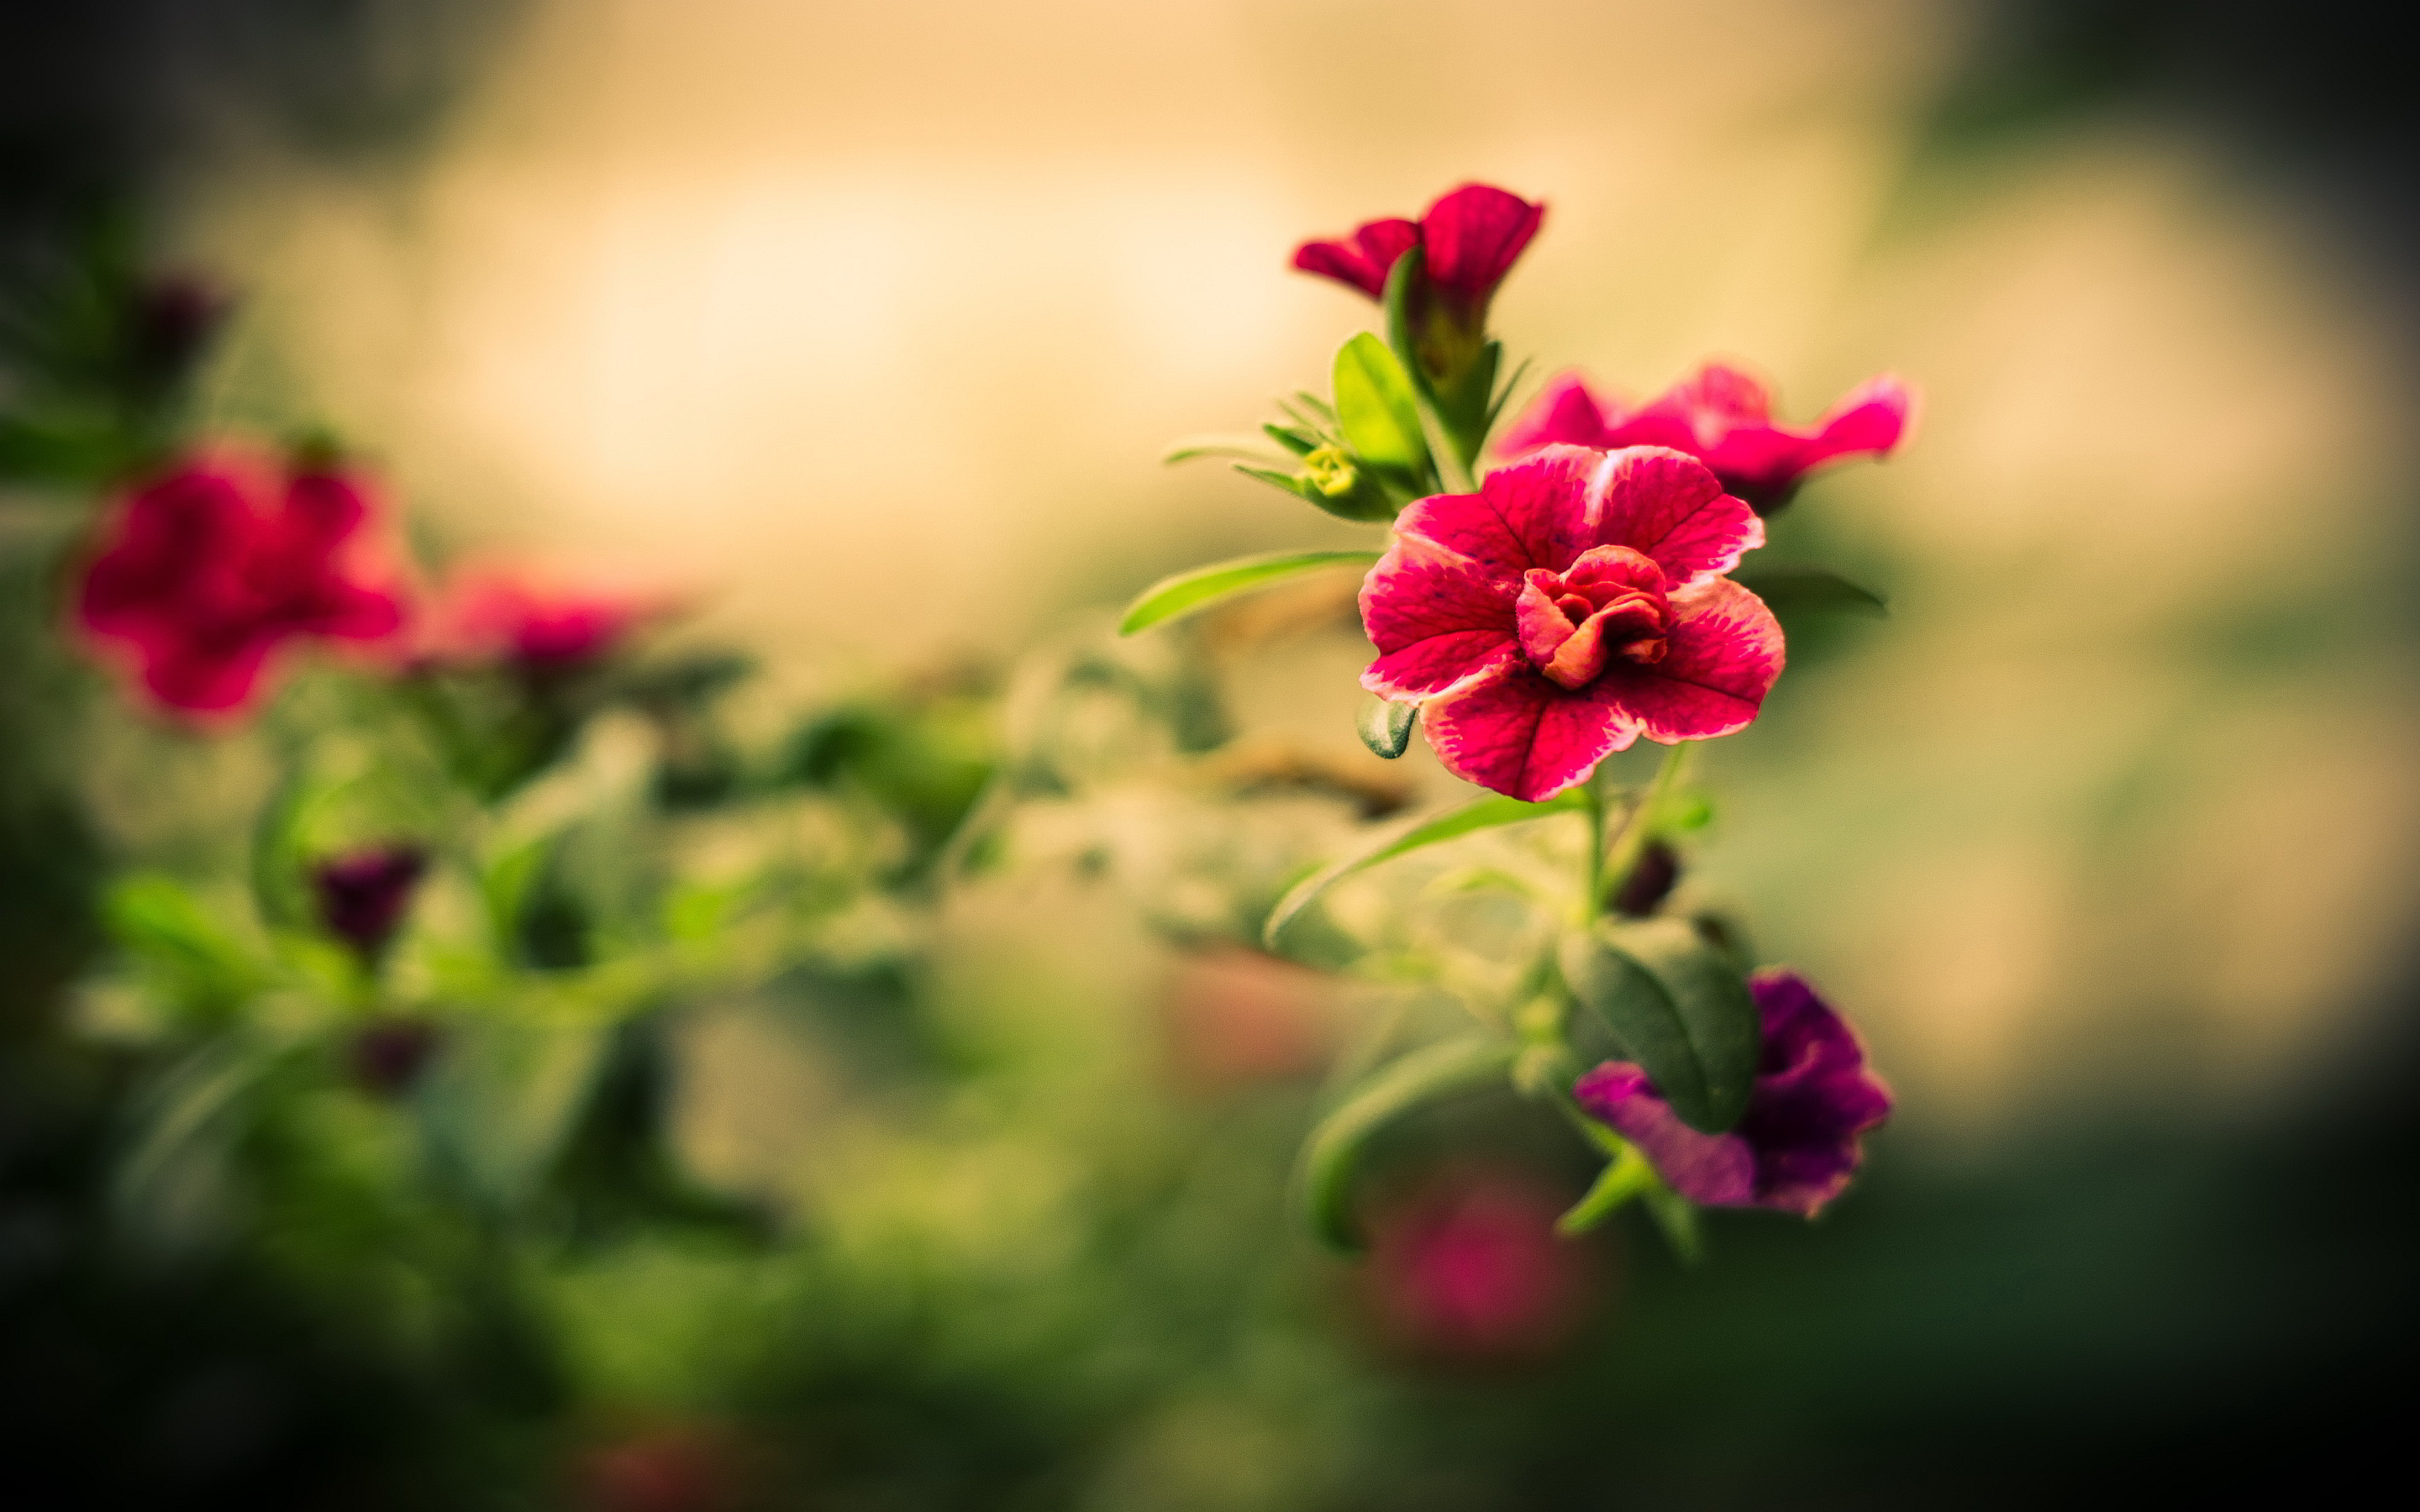 Hd Macro Flower Images Widescreen Pics Of Androids Wallpaper Red ...